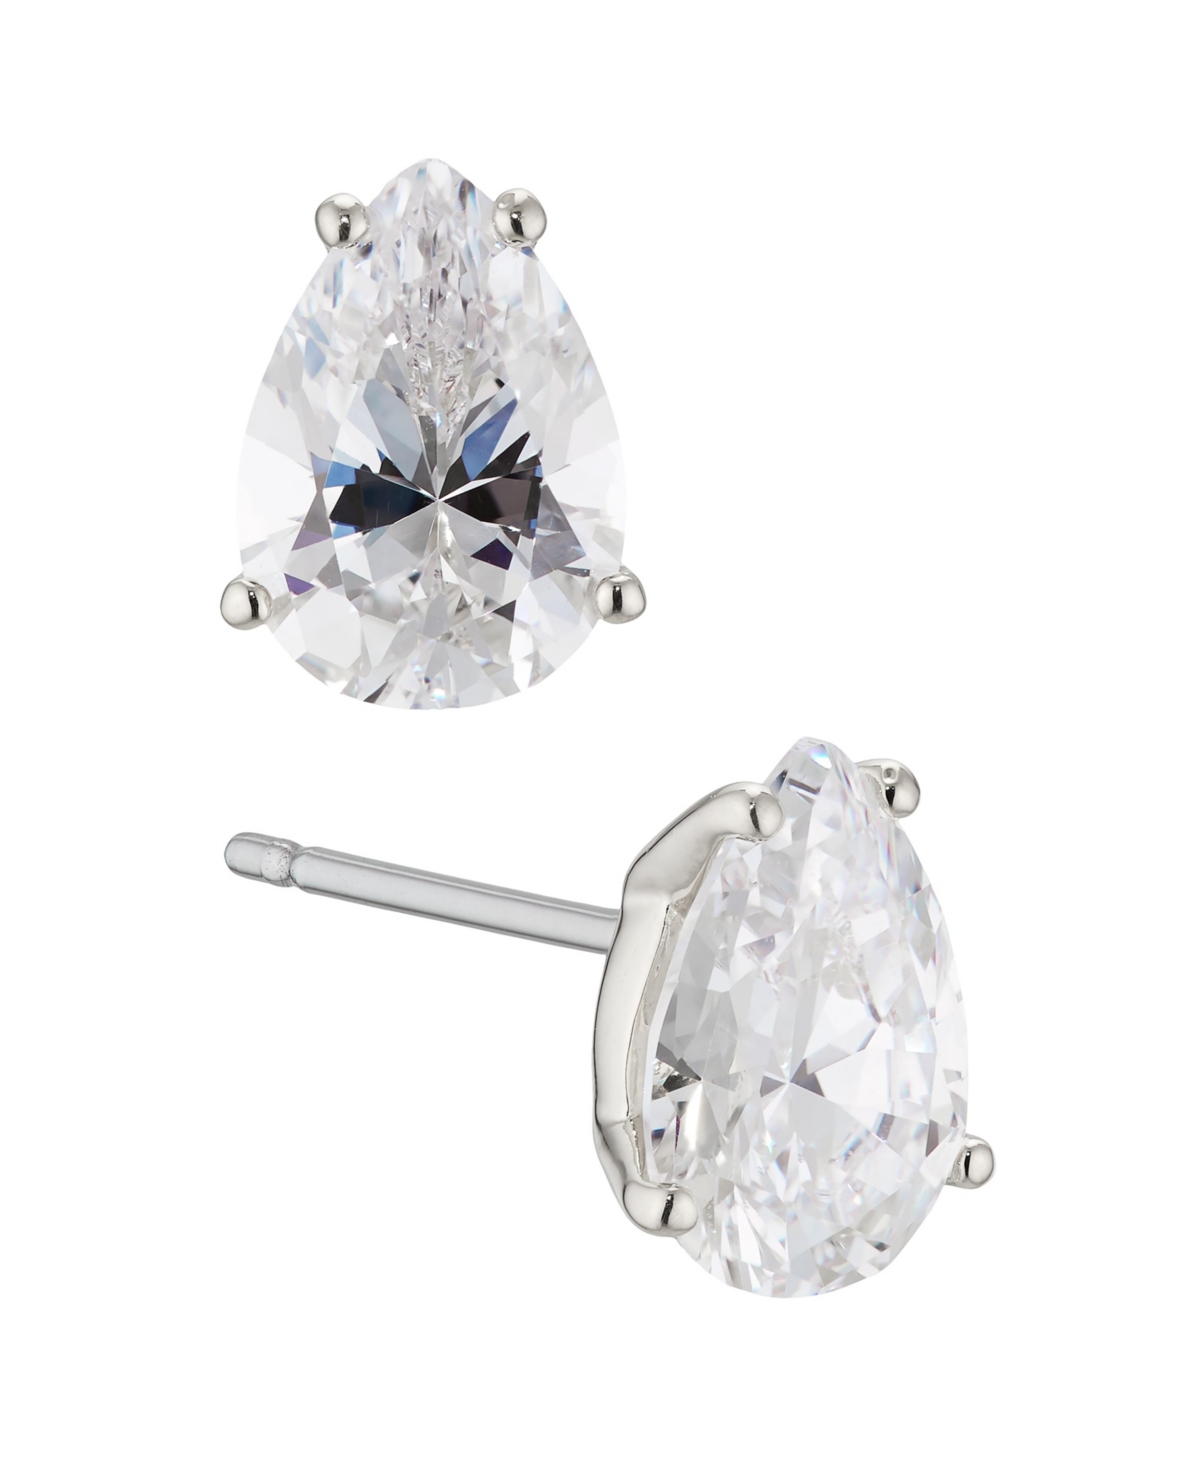 Pear Cubic Zirconia Earring, Created for Macy's - Rhodium